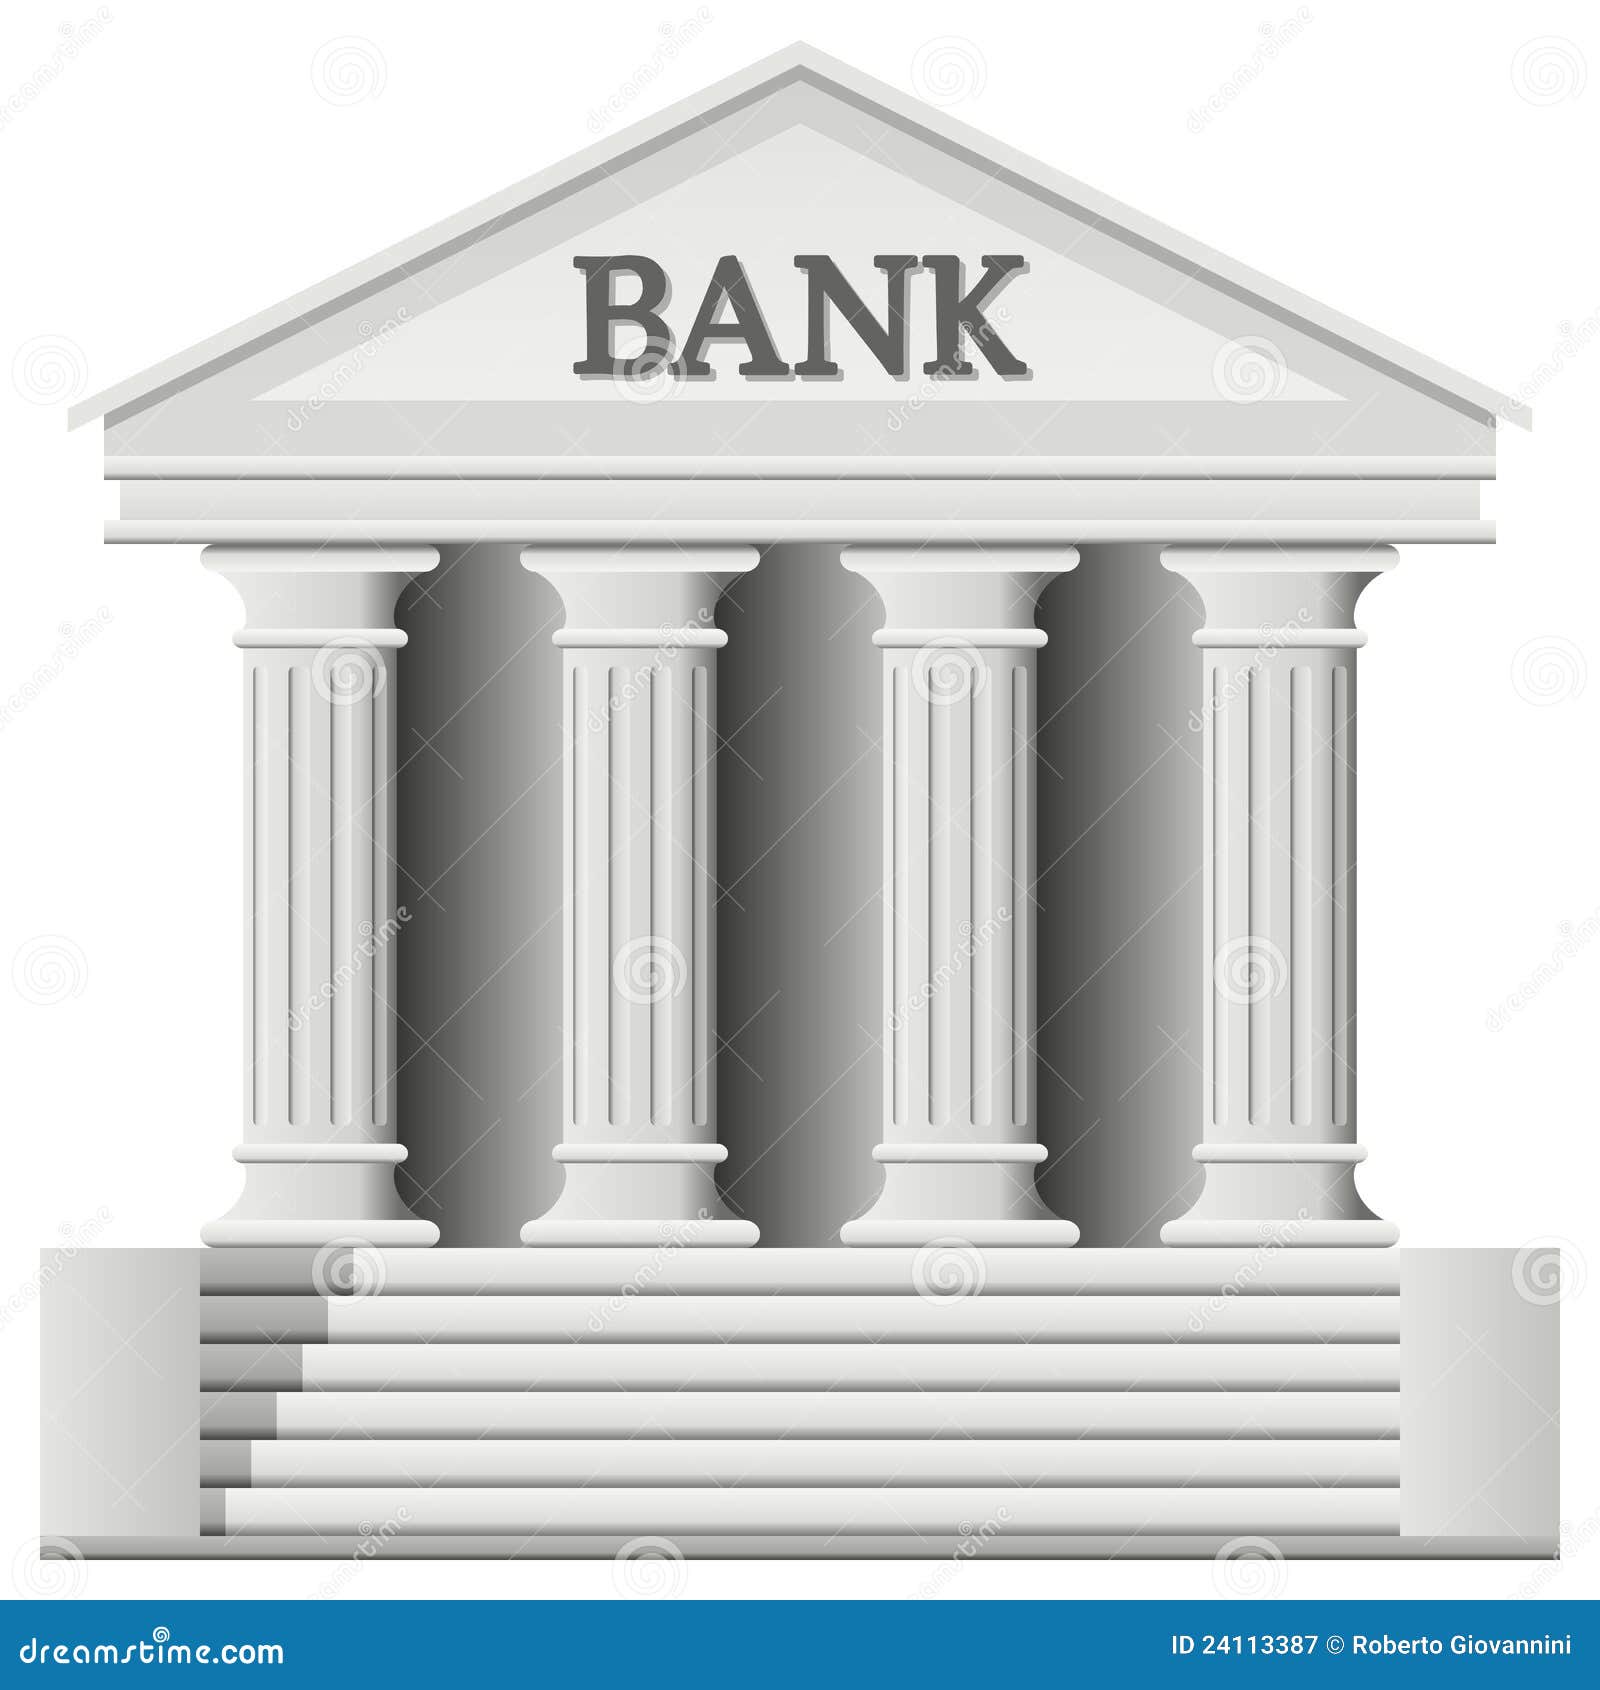 clipart of a bank building - photo #22